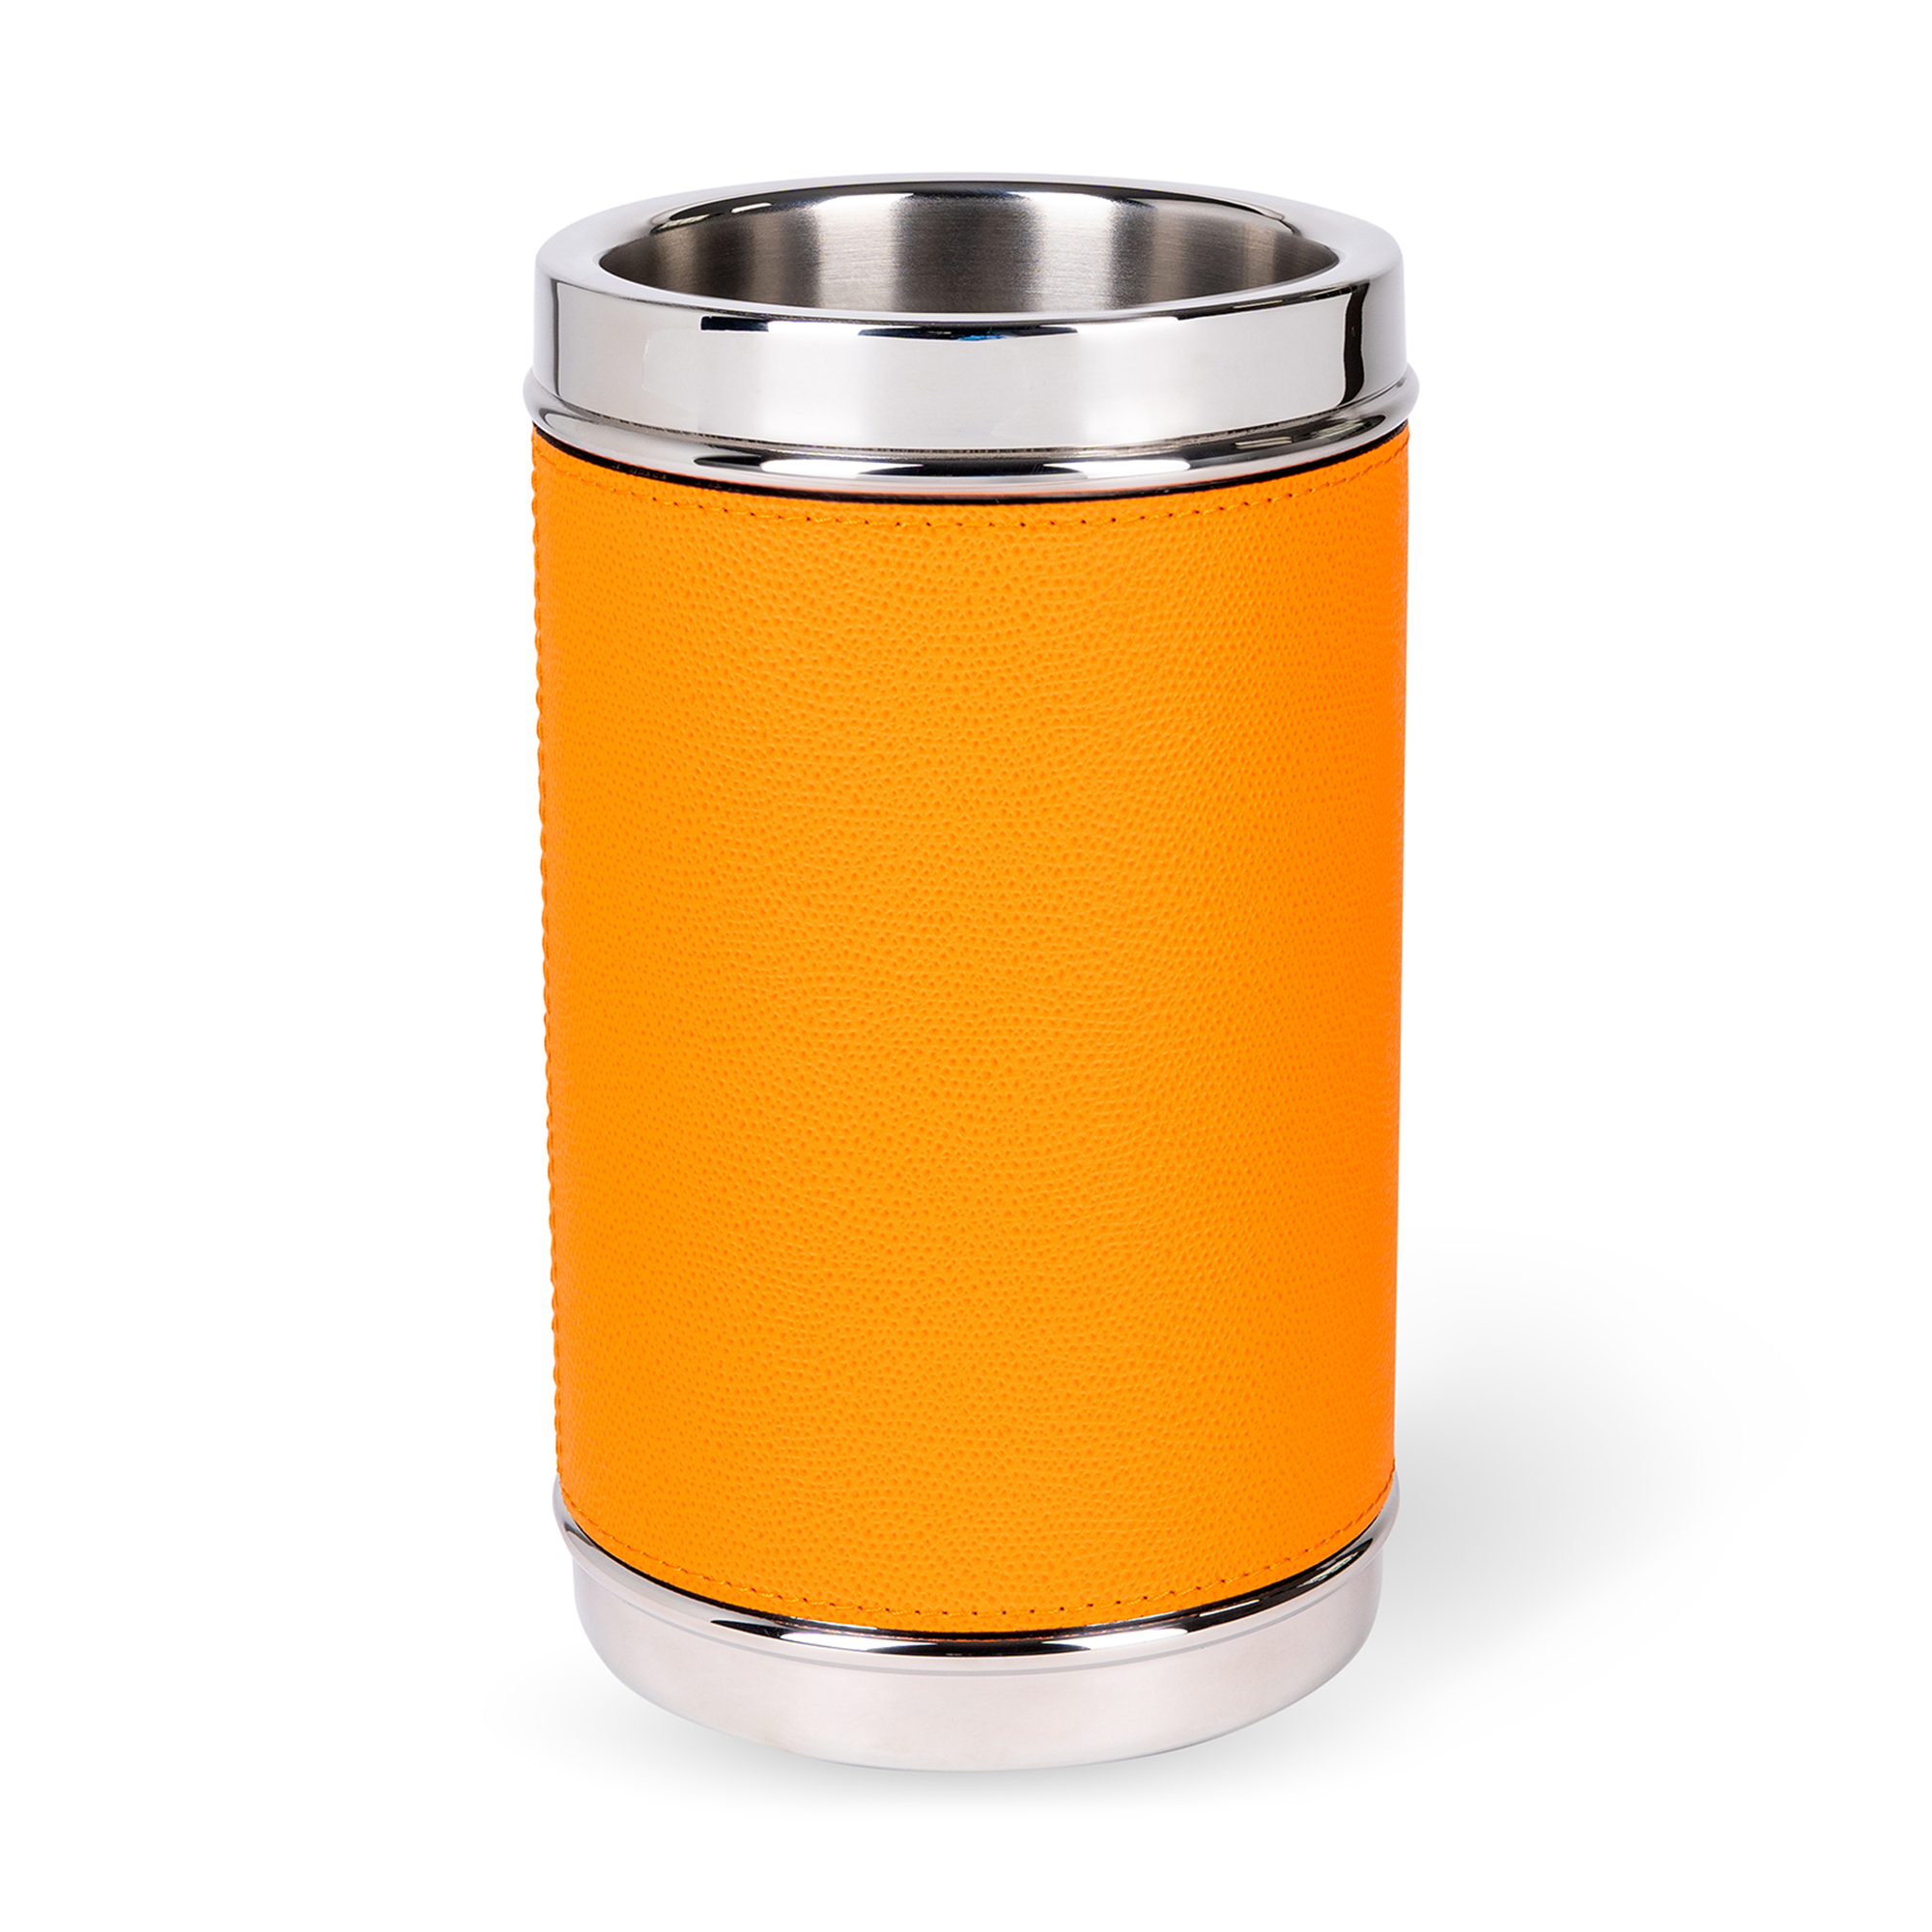 Encased in the finest calfskin, this Orange Ocean Bottle Cooler keeps your beverages cool in vibrant style. A sleek and elegant design makes it a statement accessory for any gathering.